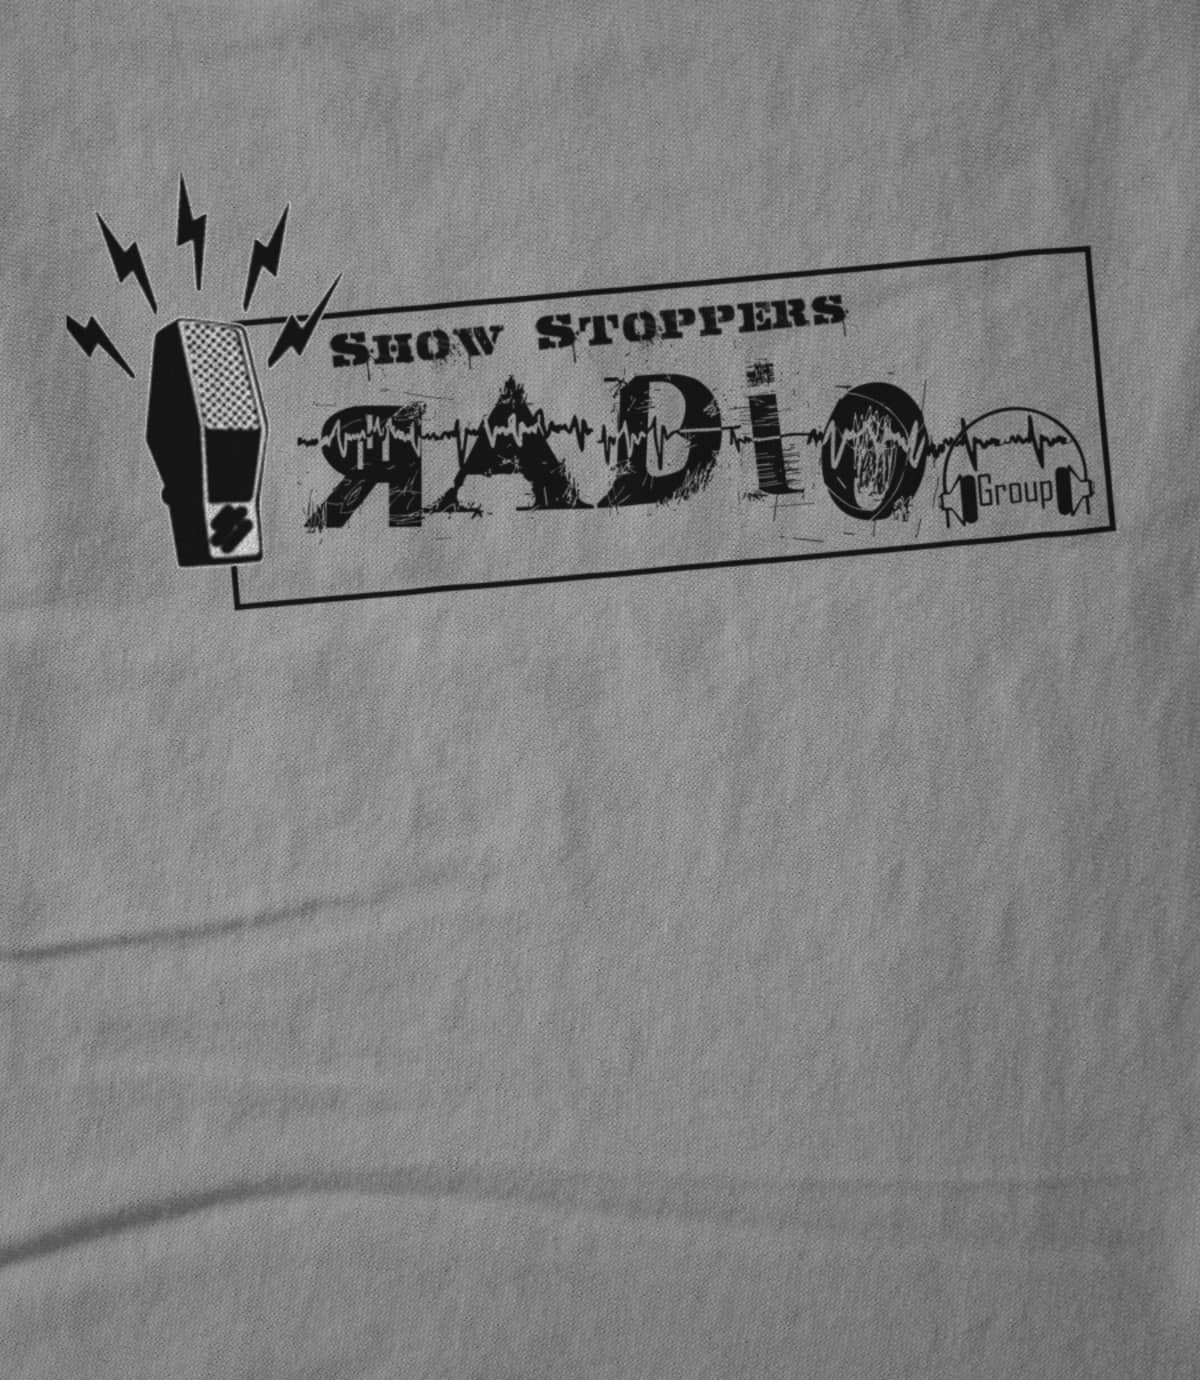 Show Stoppers Radio